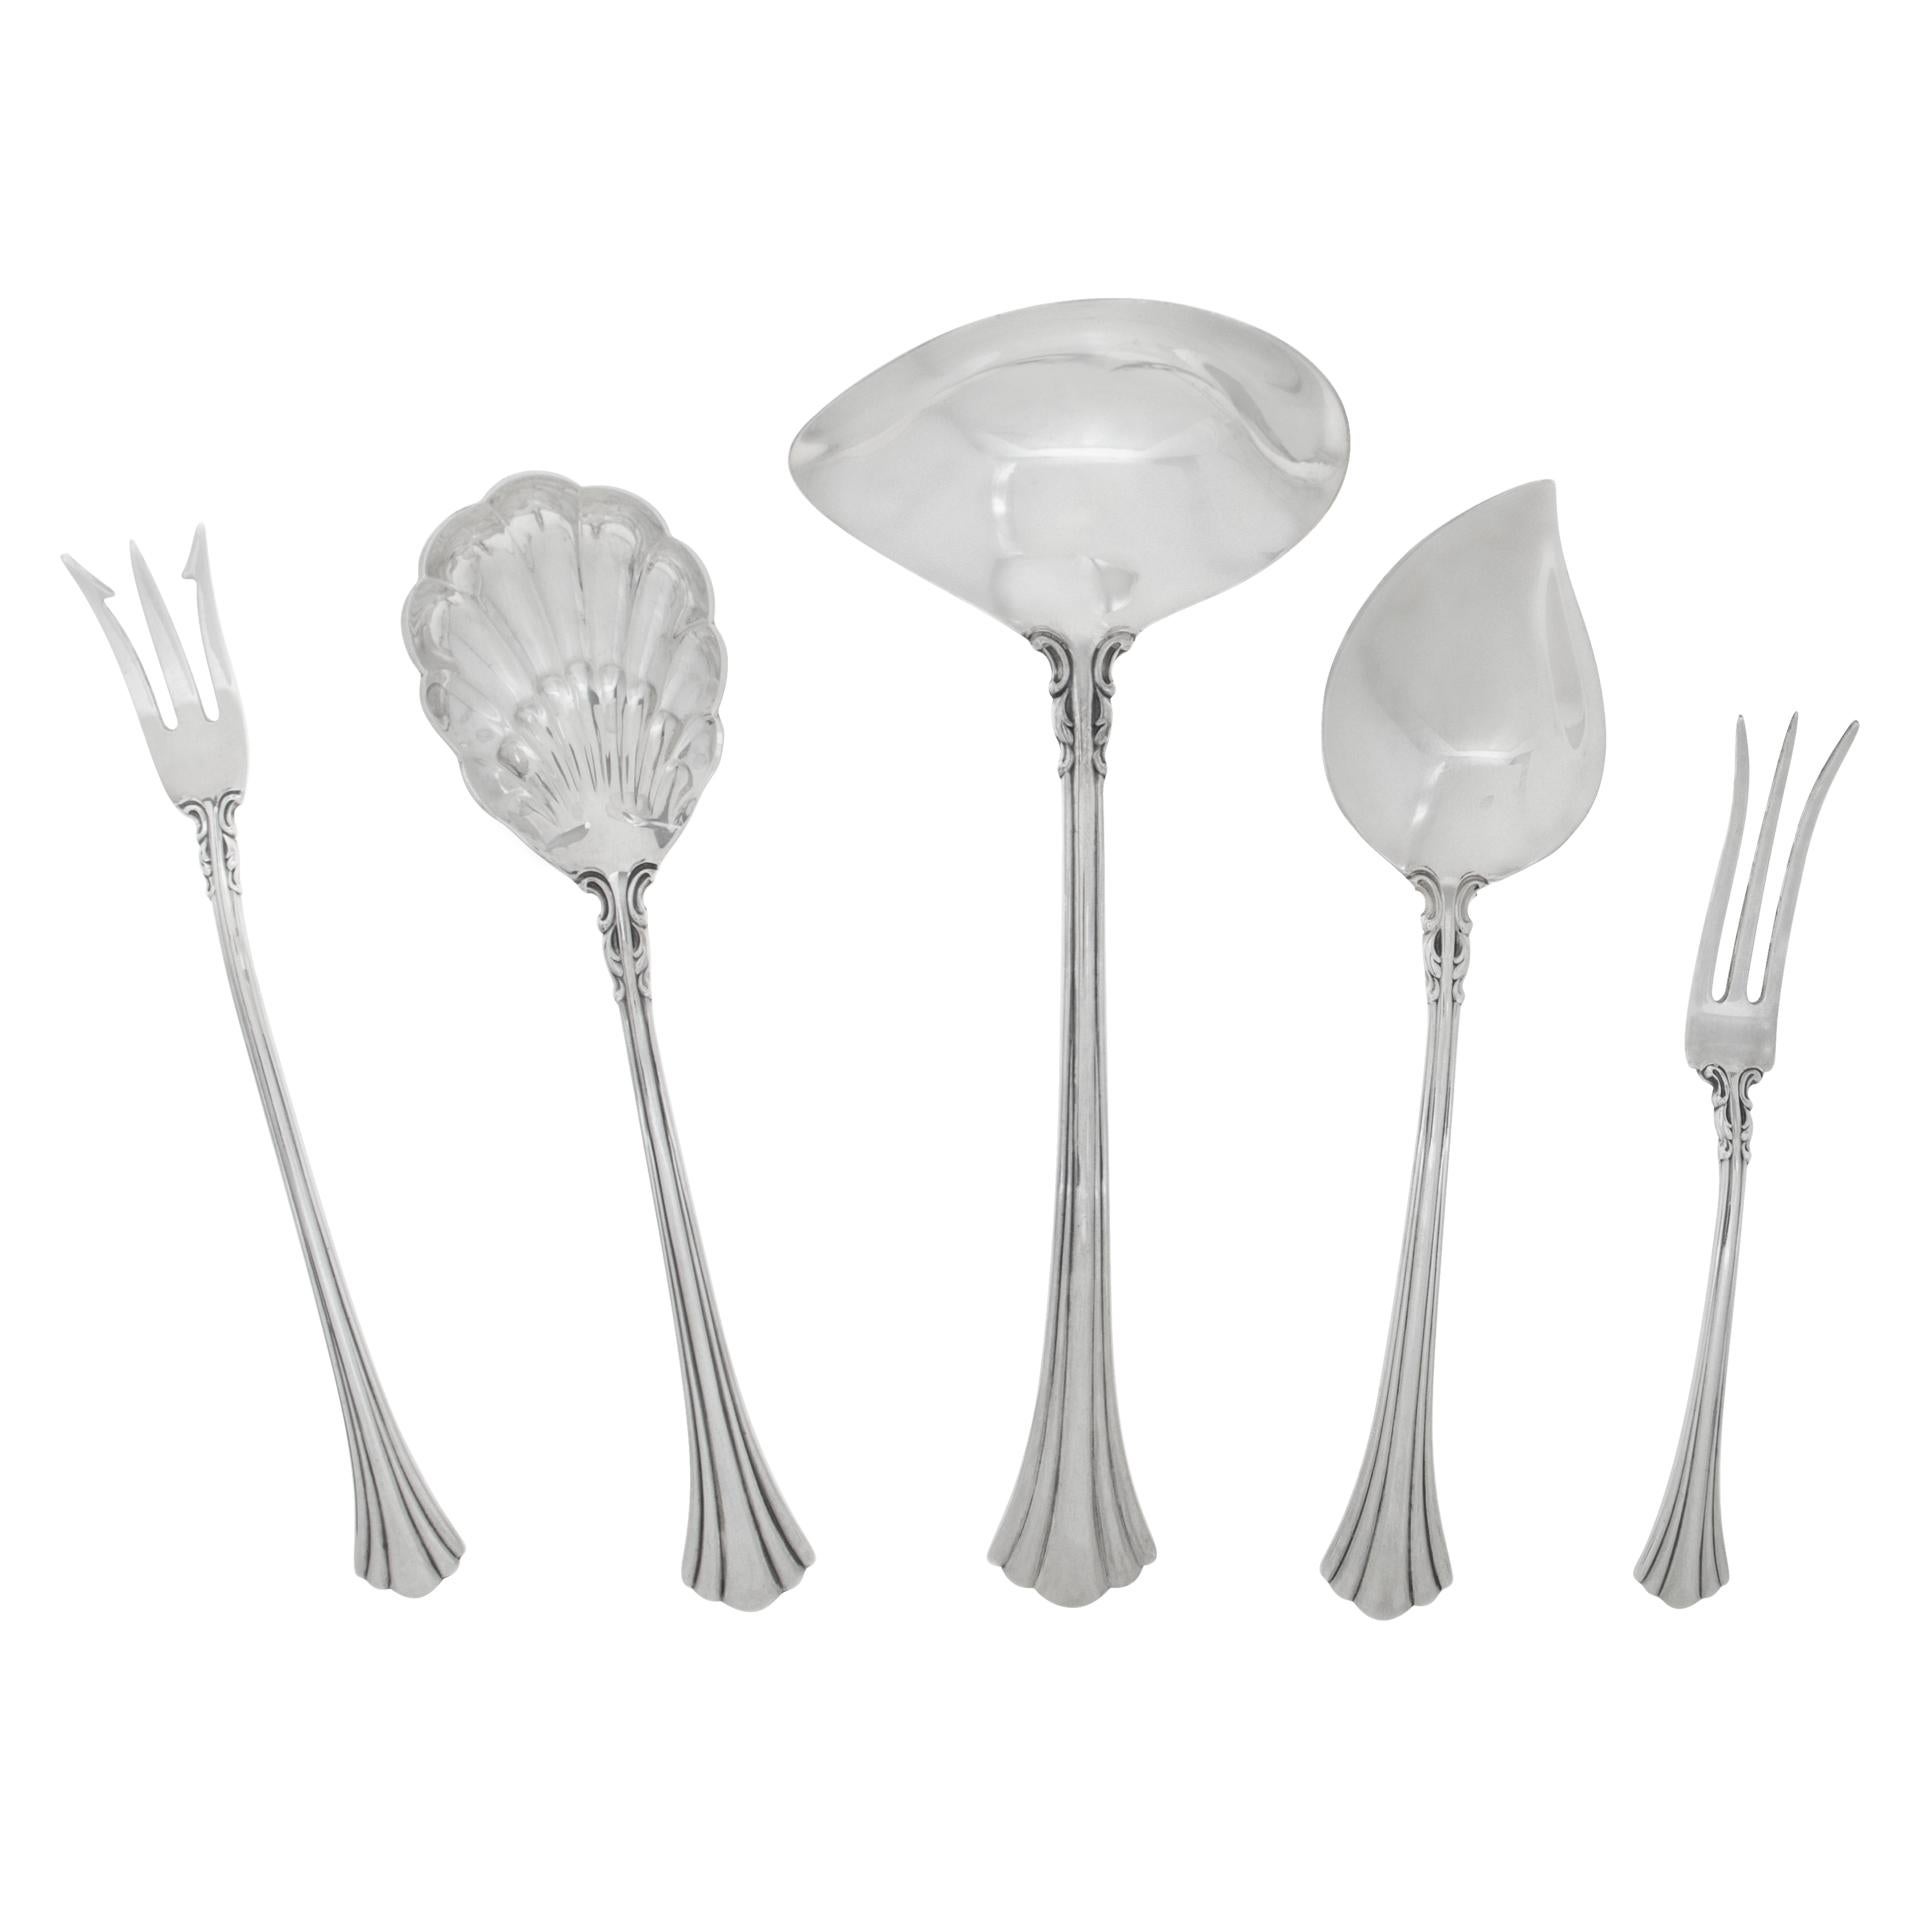 EIGHTEEN CENTURY sterling flatware set patented in 1971 by Reed & Barton. 4 Place settings for 12 + 4 Place setting for 8 with 11 serving pieces. over 113 ounces troy of .925 sterling silver, (counting all pieces with stainless steel blades as 1.00